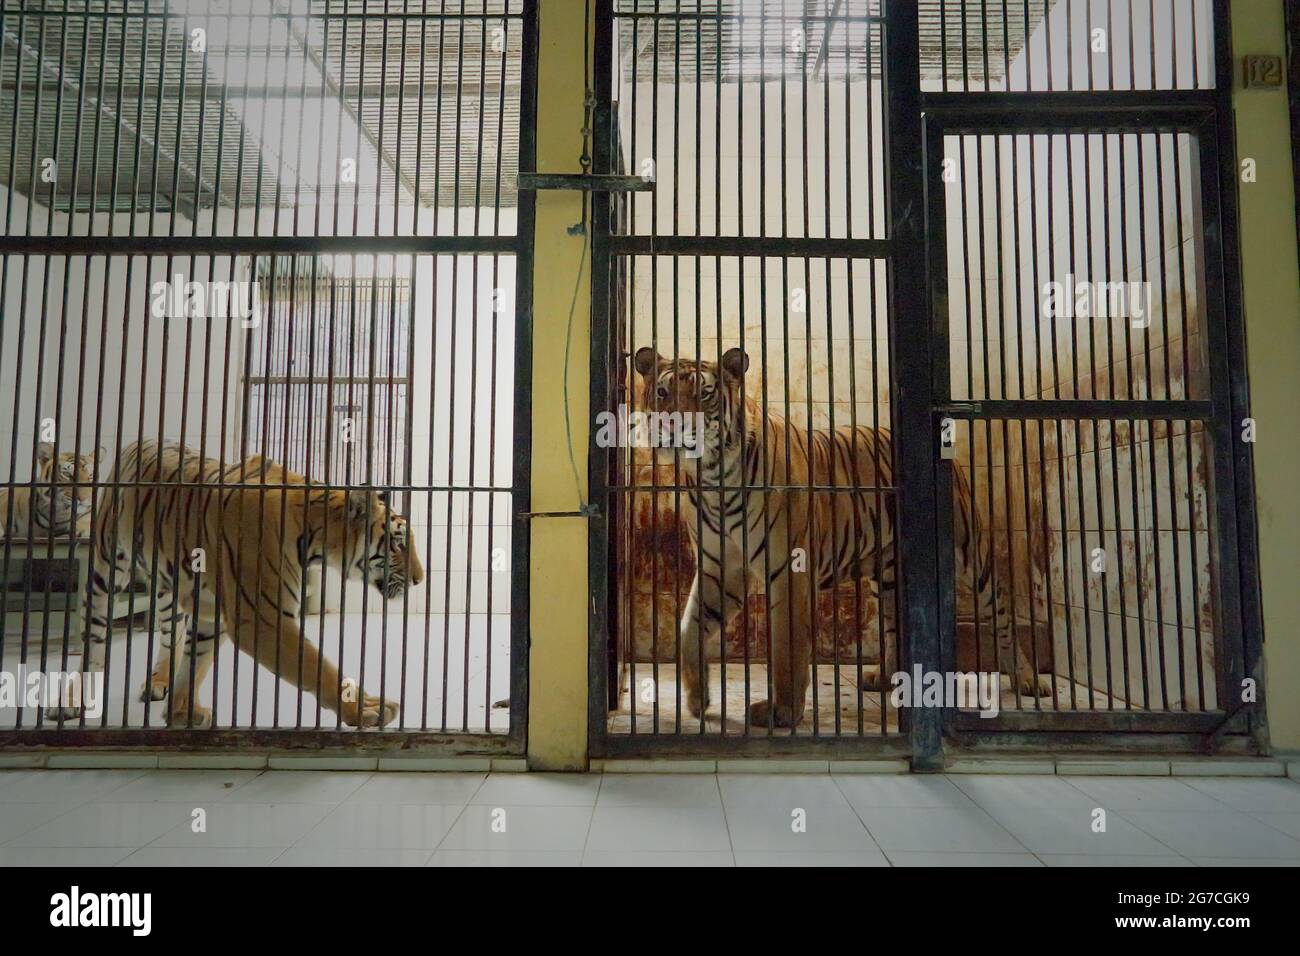 Sumatran tigers (left) and a Bengal tiger (right) at the veterinary facility managed by Bali Zoo in Gianyar, Bali, Indonesia. Stock Photo